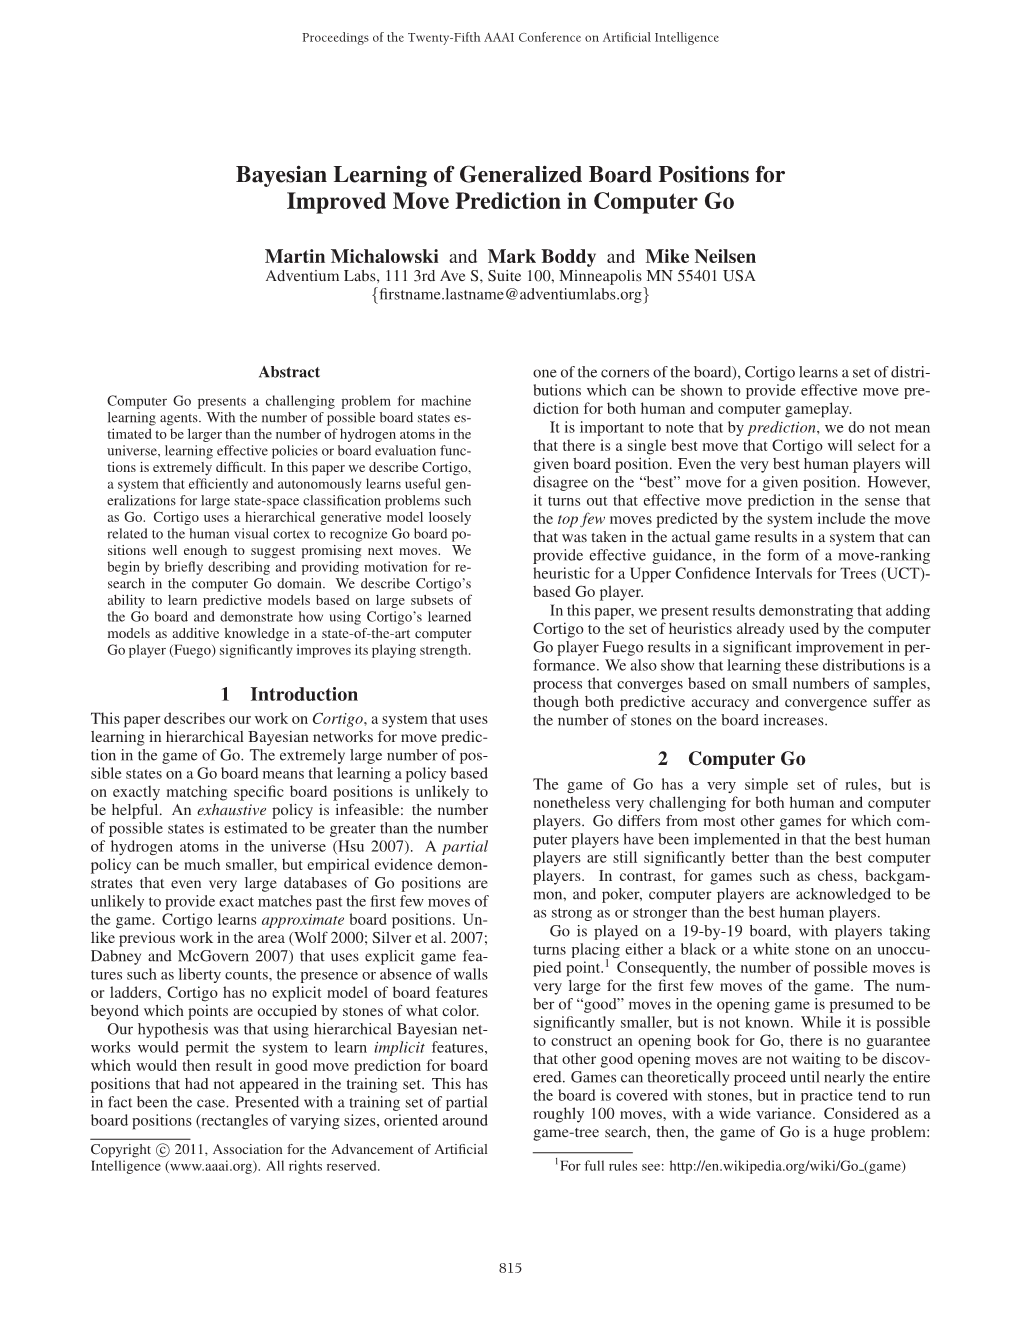 Bayesian Learning of Generalized Board Positions for Improved Move Prediction in Computer Go